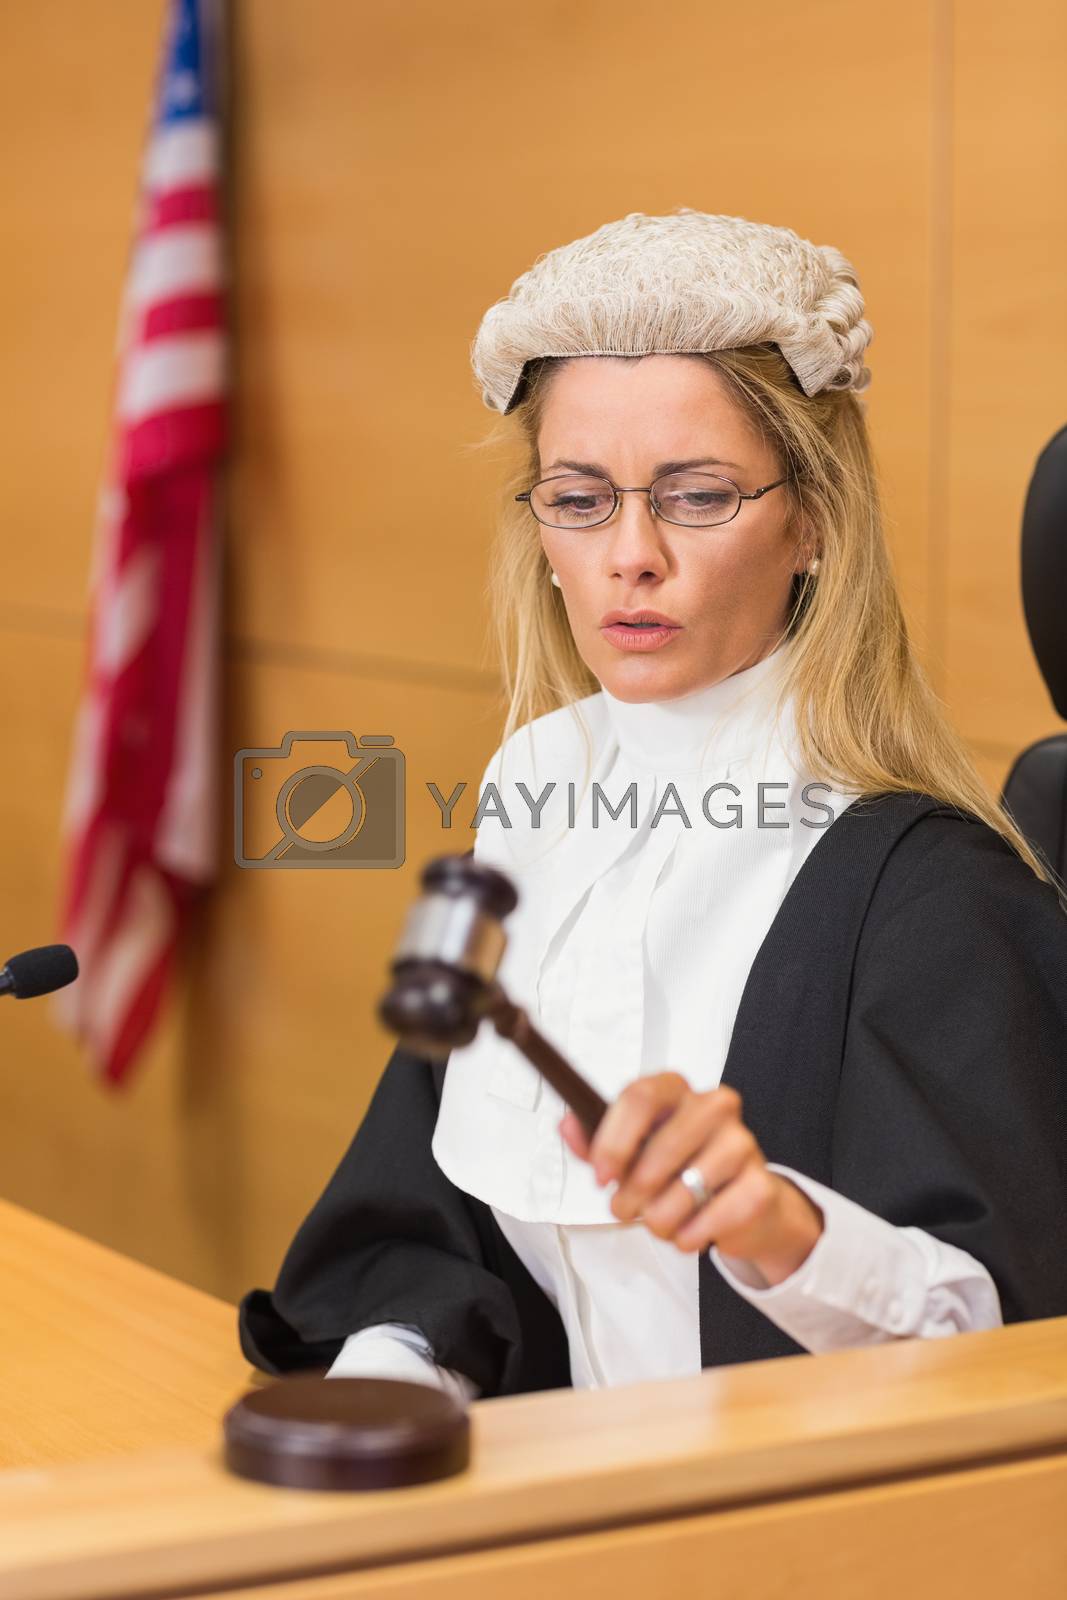 Royalty free image of Stern judge sitting and listening by Wavebreakmedia